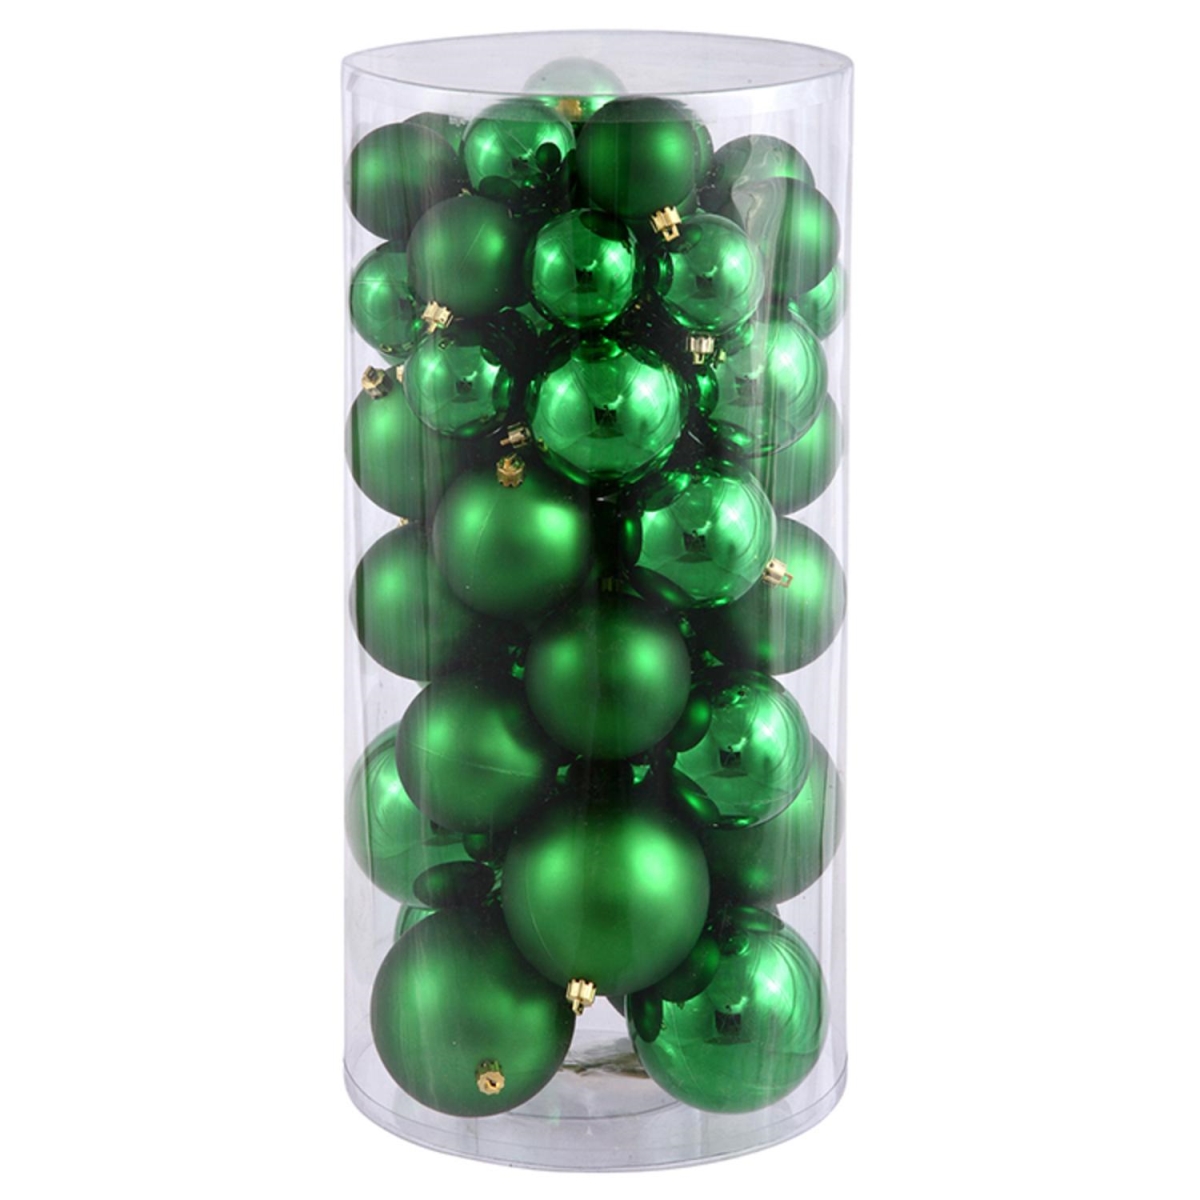 31104450 Xmas Green Shiny & Matte Shatterproof Christmas Ball Ornaments - 50 Count, 2.4 X 3 X 4 In.